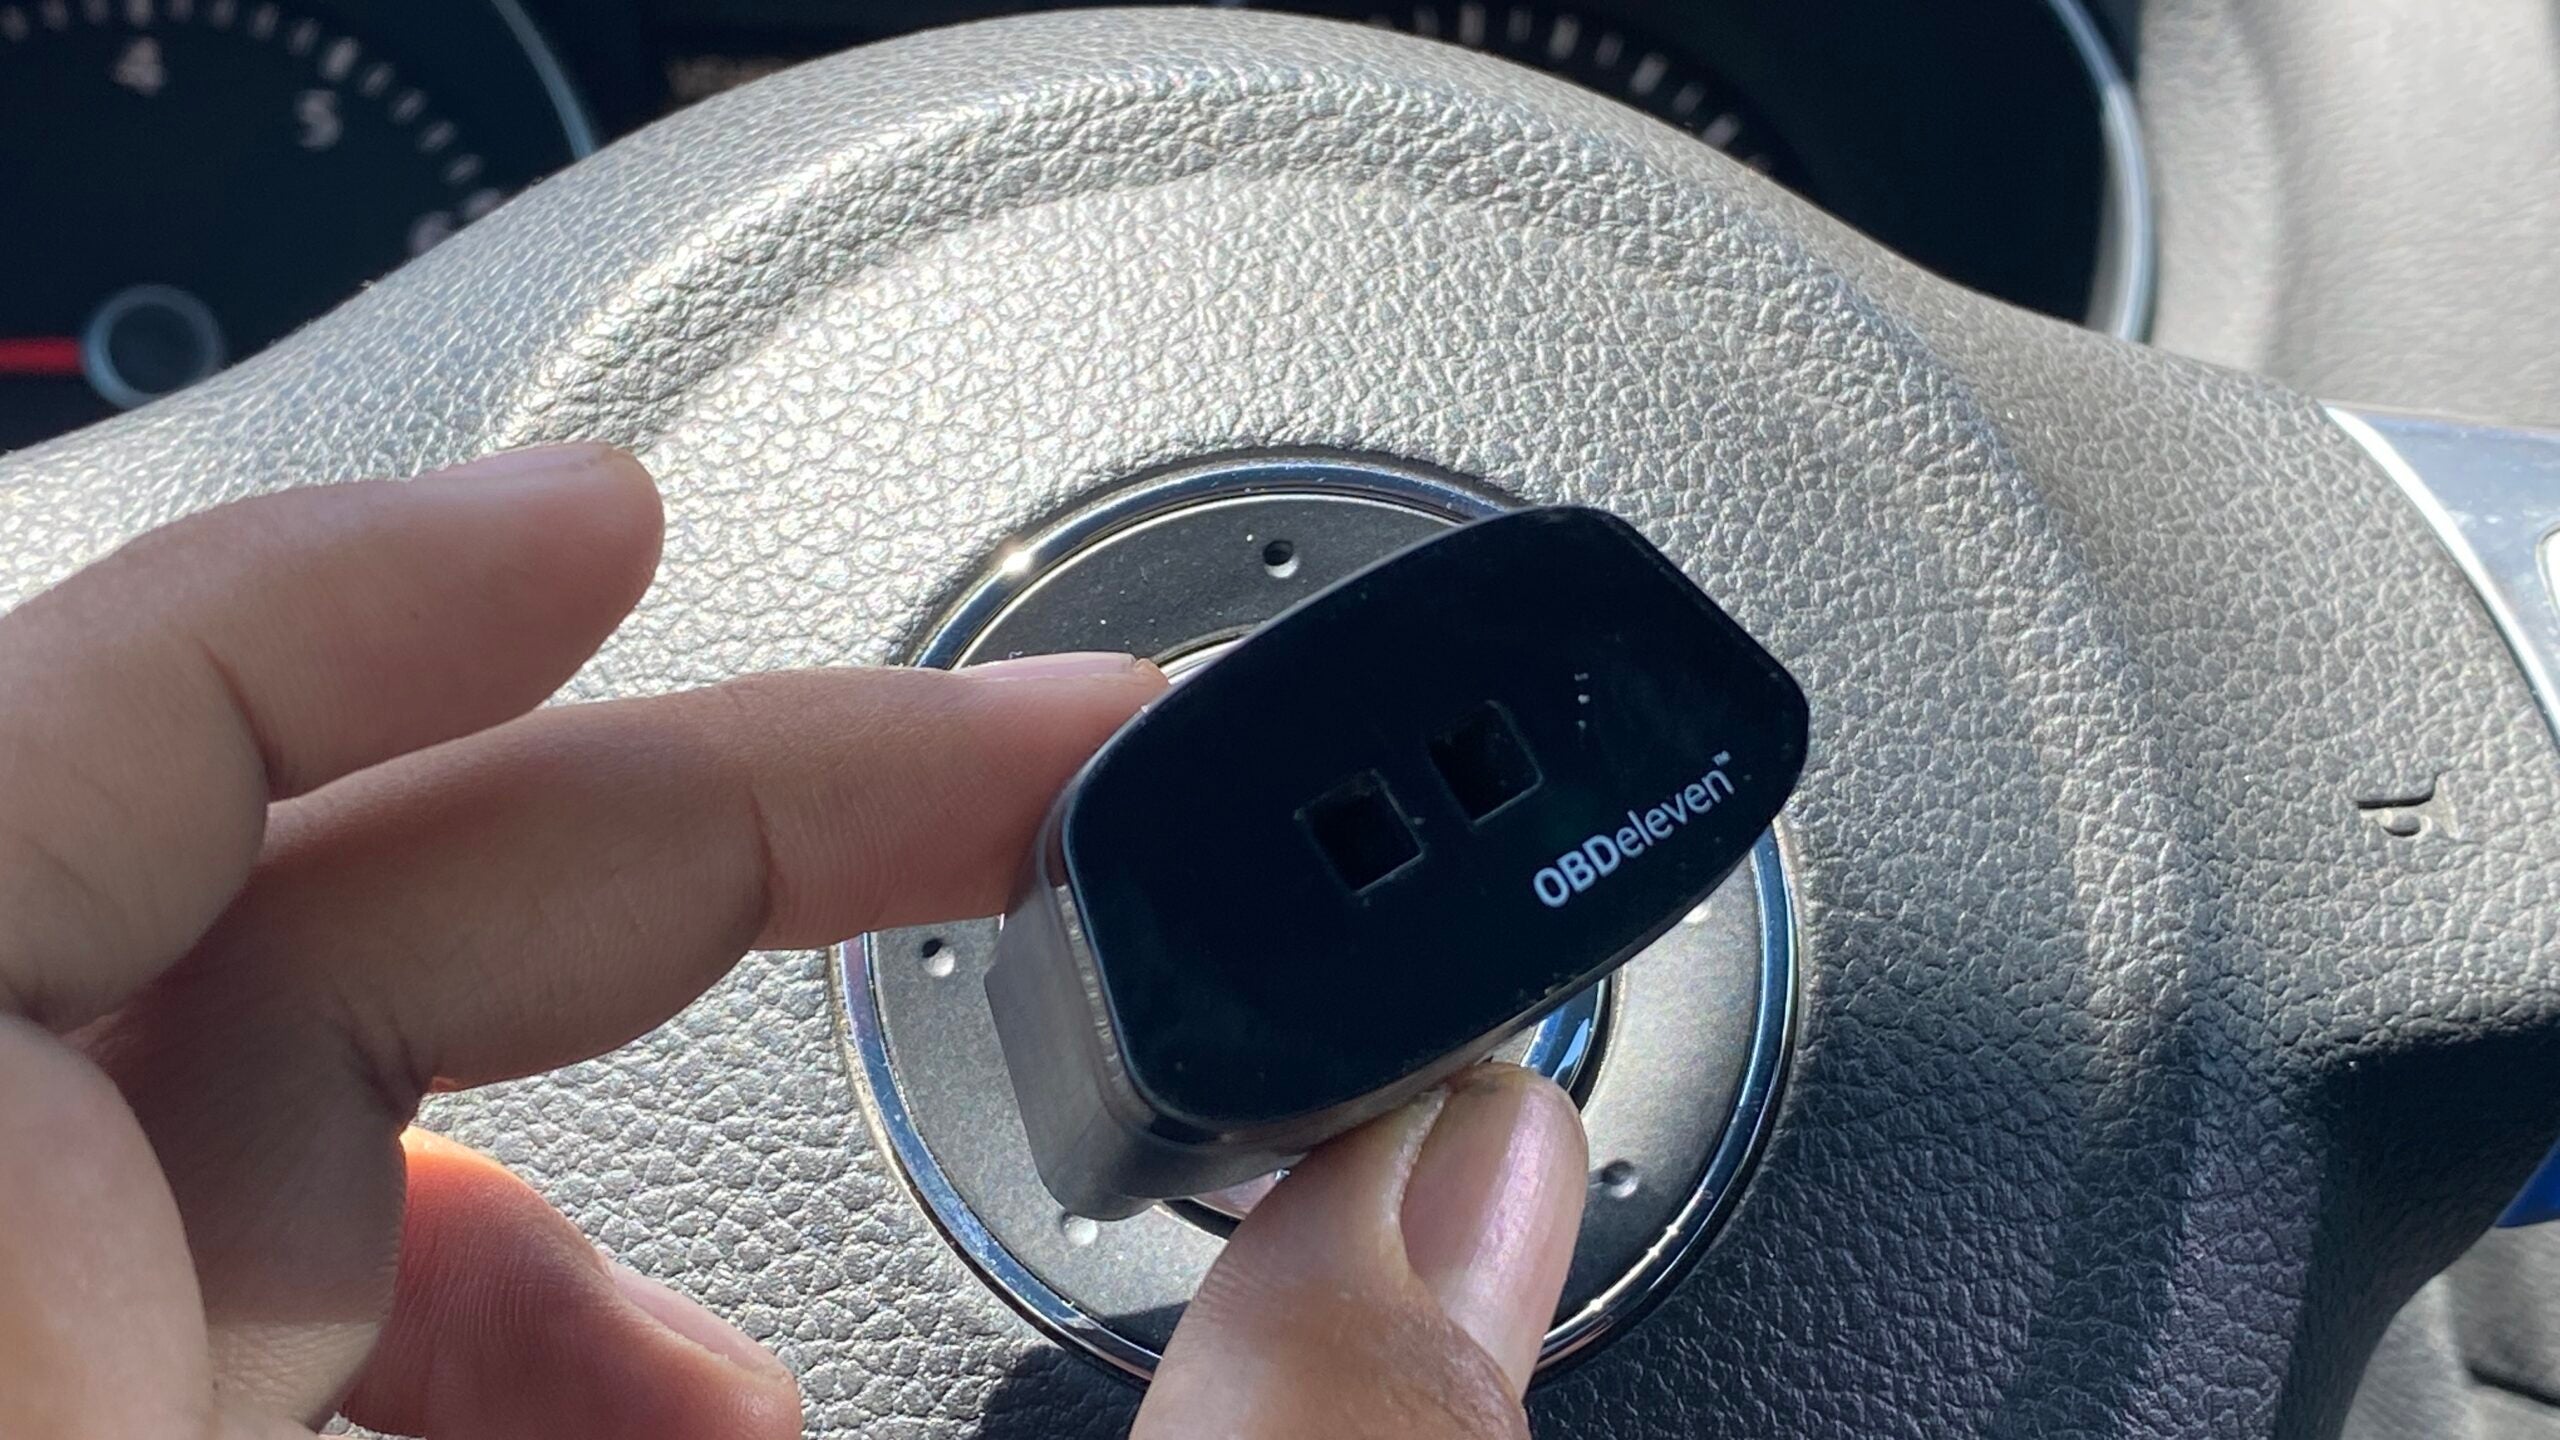 An OBDEleven bluetooth dongle held by a hand. A 2010 VW GTI steering wheel is in the background.